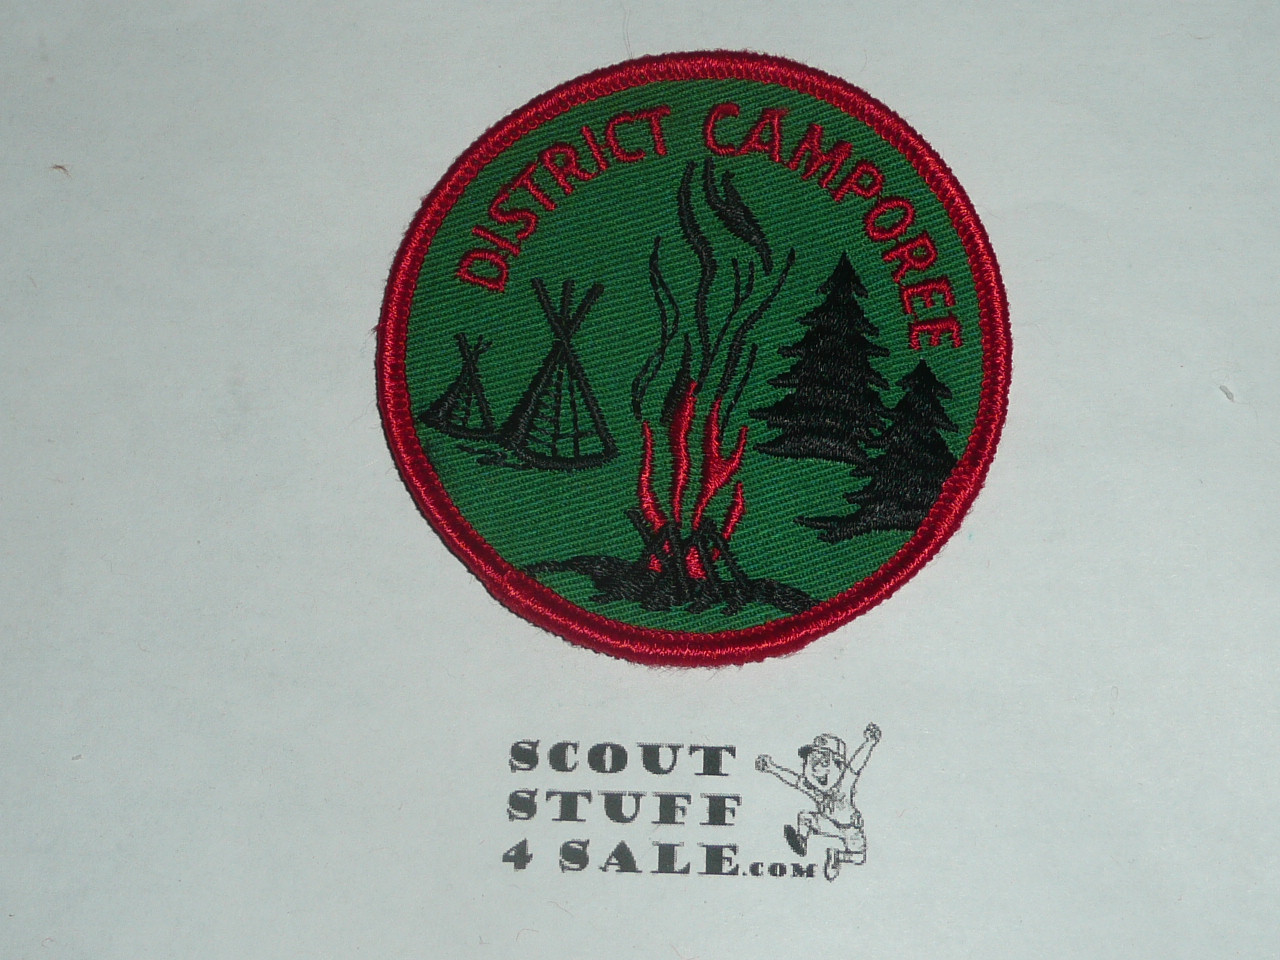 District Camporee Patch, Generic BSA issue, grn twill, red r/e bdr, sewn